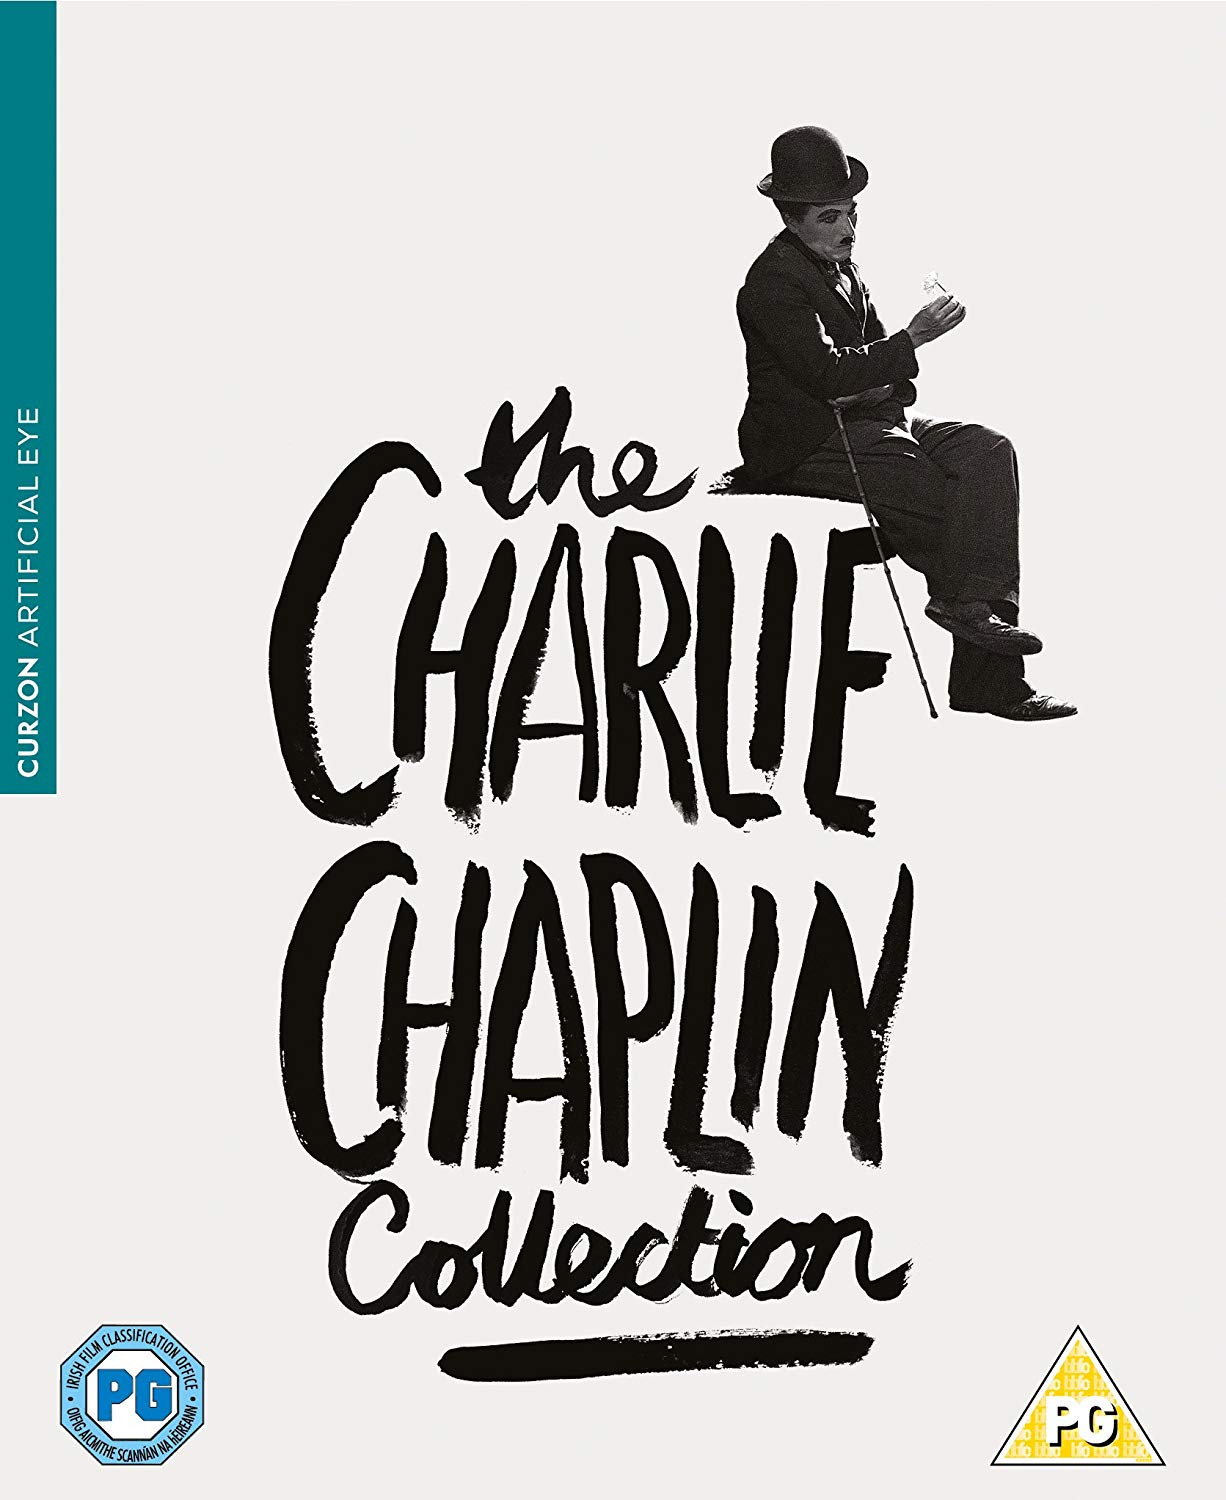 The Charlie Chaplin Collection Dvd 12 Discs (DVD)